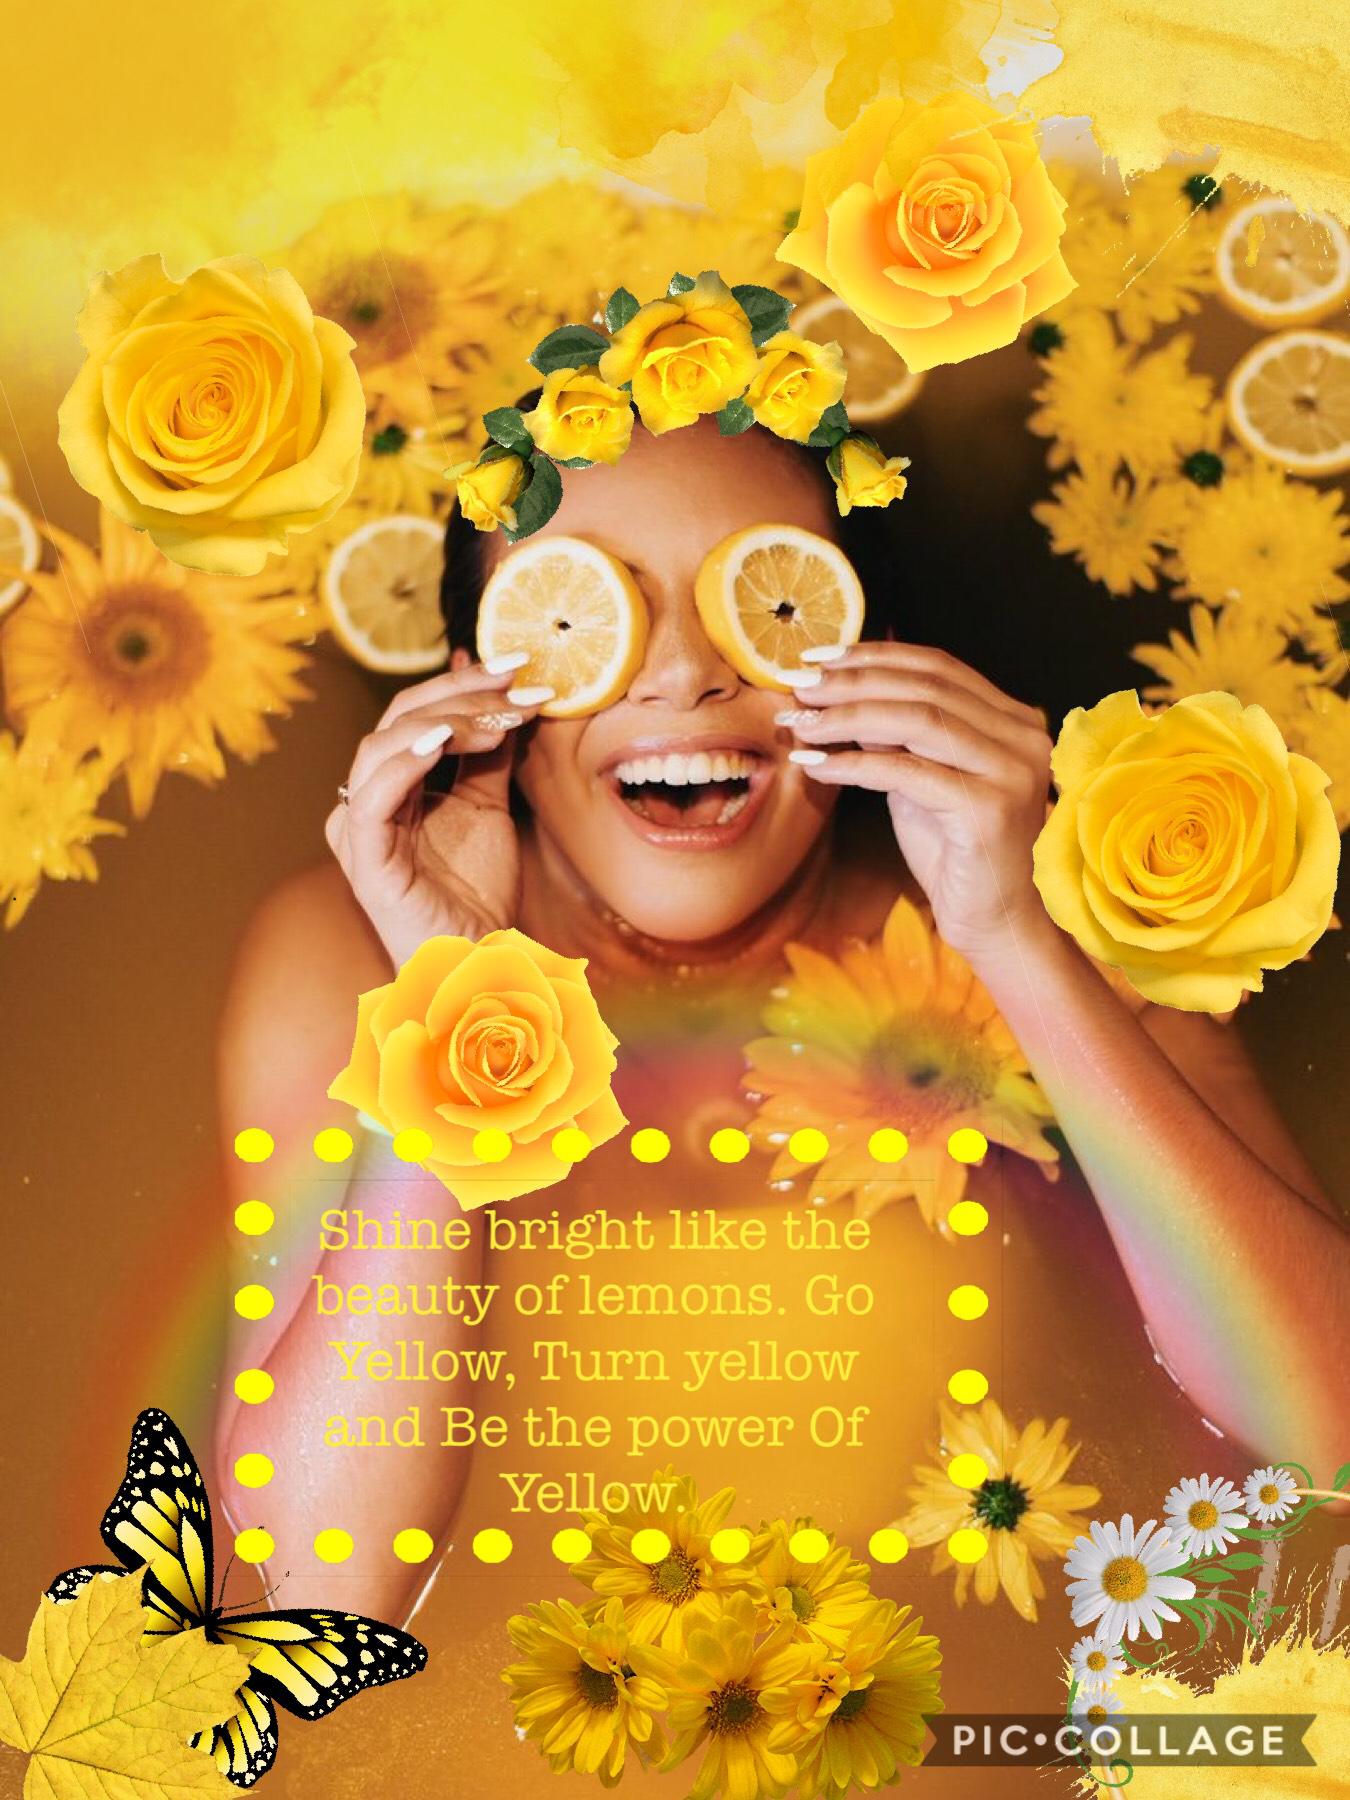 Decided to post this one of Adelaine Morin that I just created. Go subscribe to her YouTube which is Adelaine Morin she is the best. I am really into yellow lately so I decided to do this. Comment some celebs you want me to do collages on.